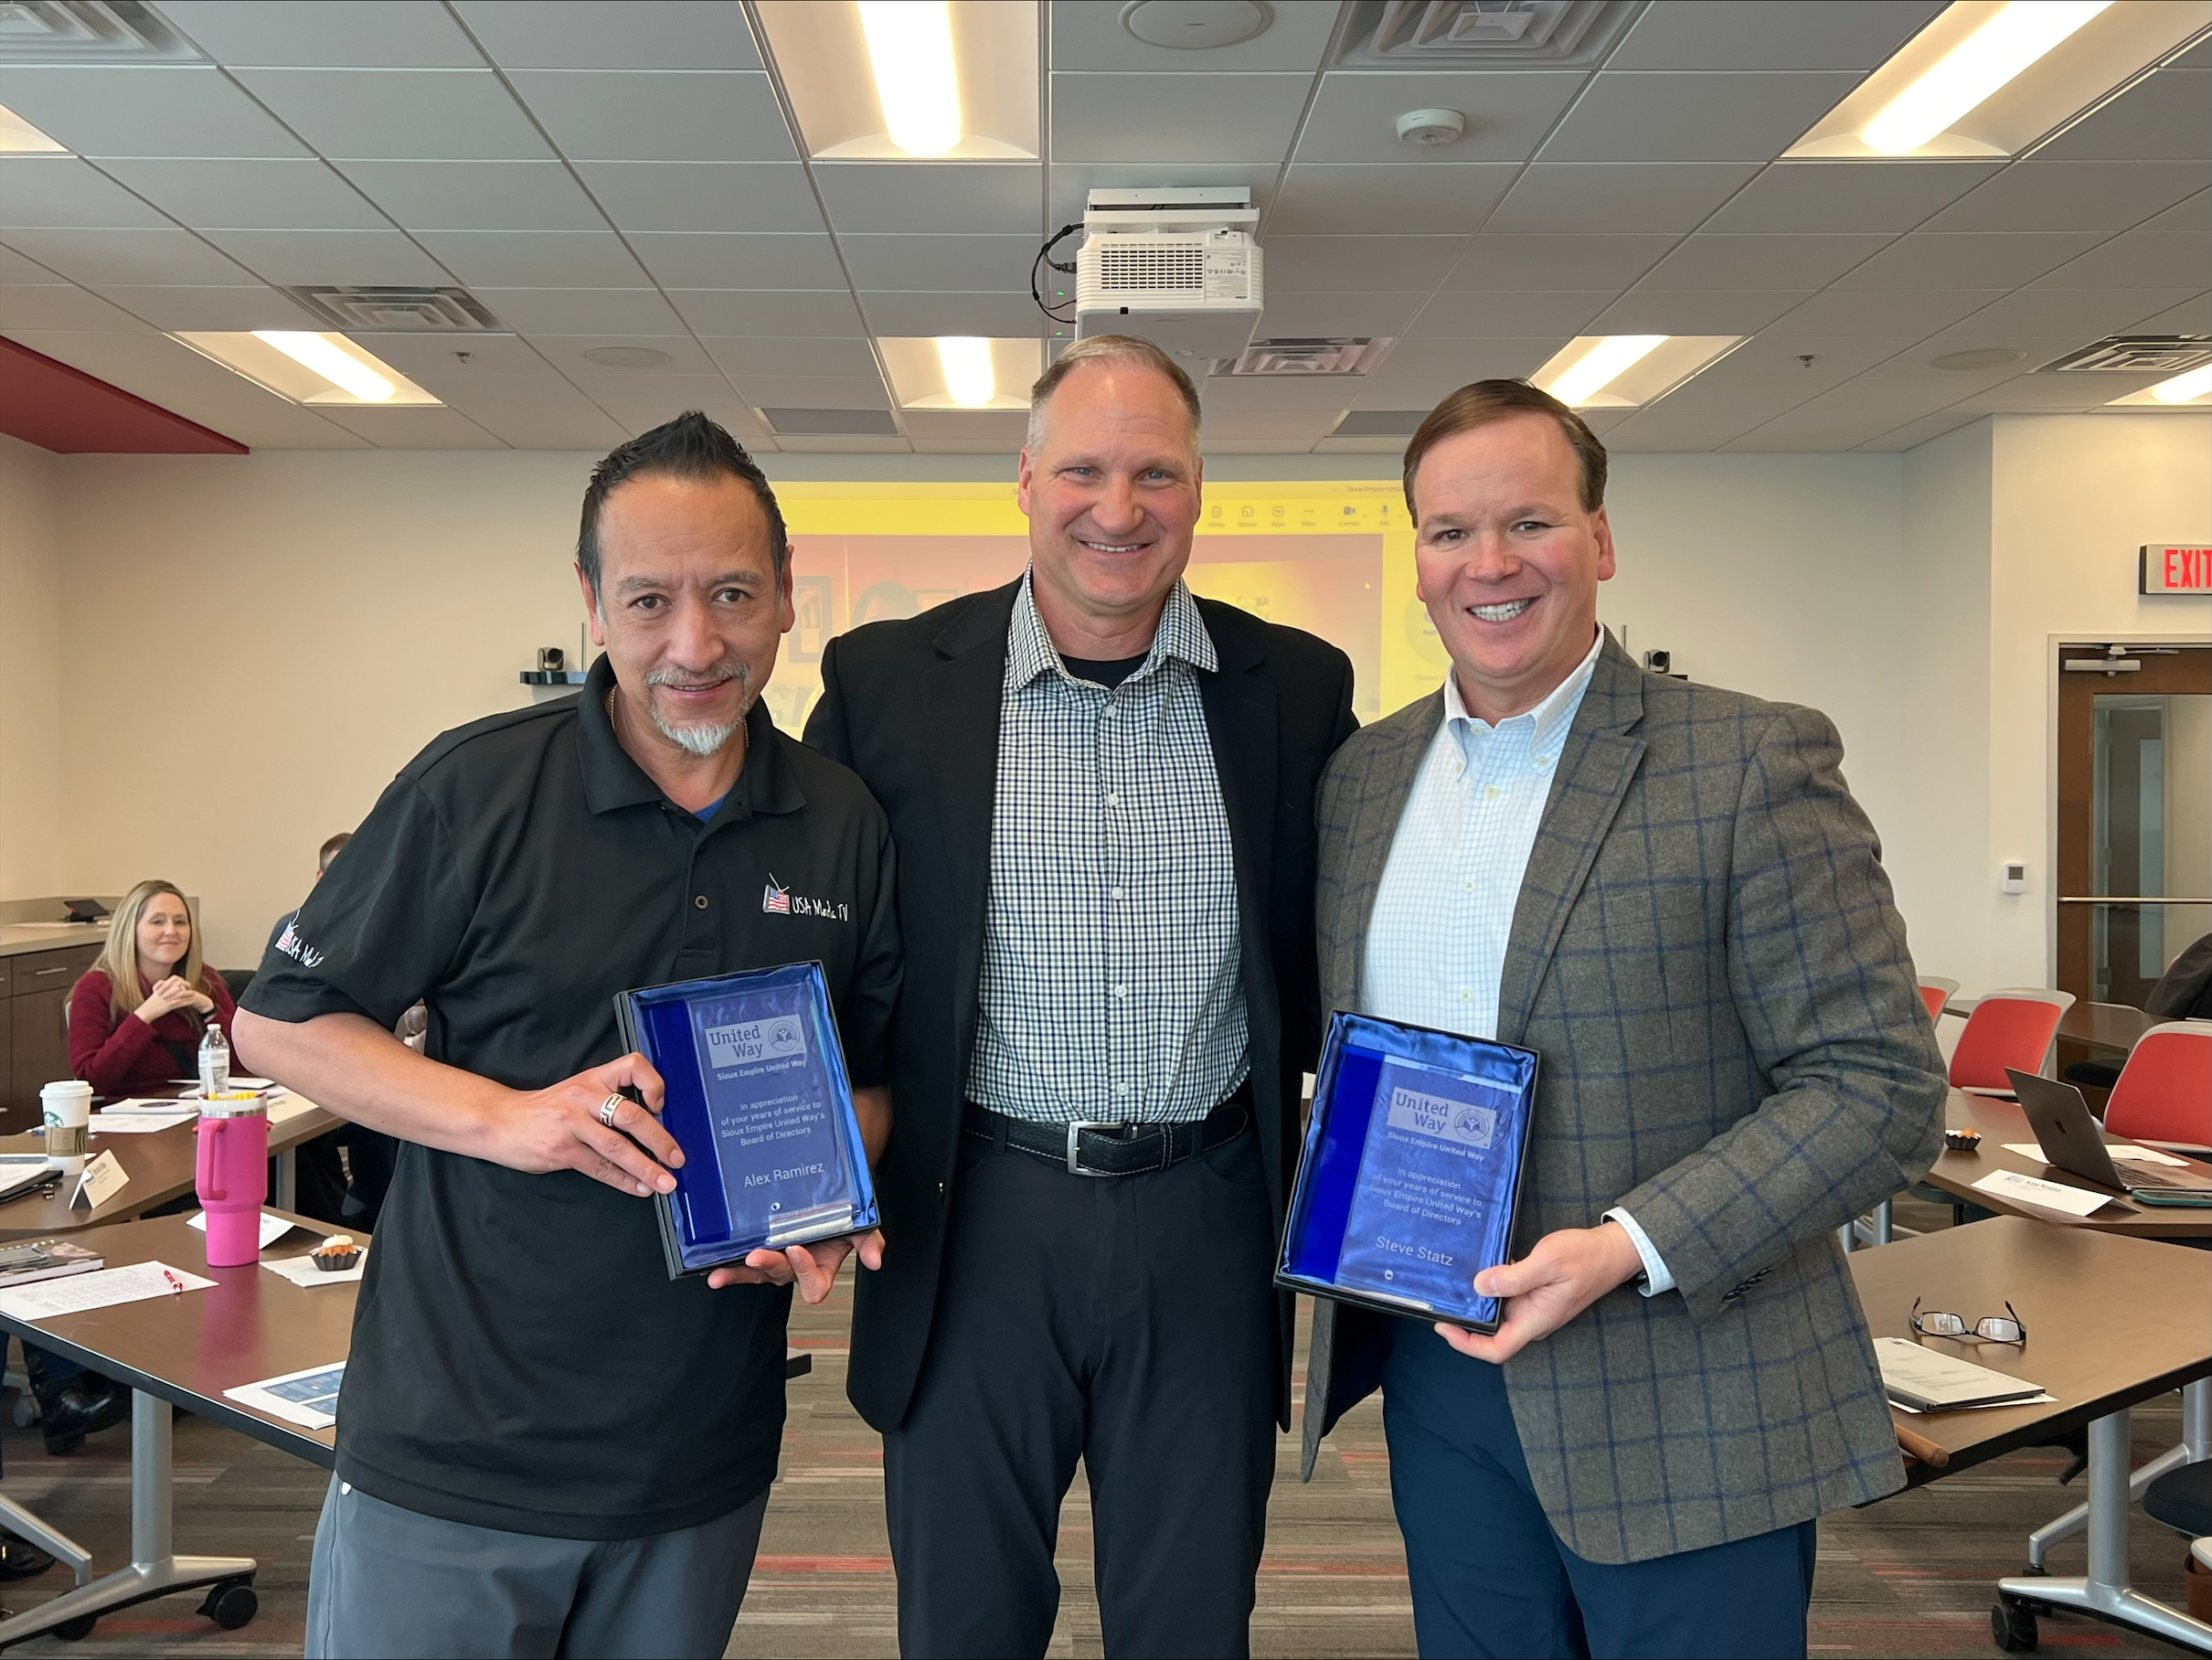 Alex Ramirez, Randy Knecht, and Steve Statz photographed with exiting board member plaques.